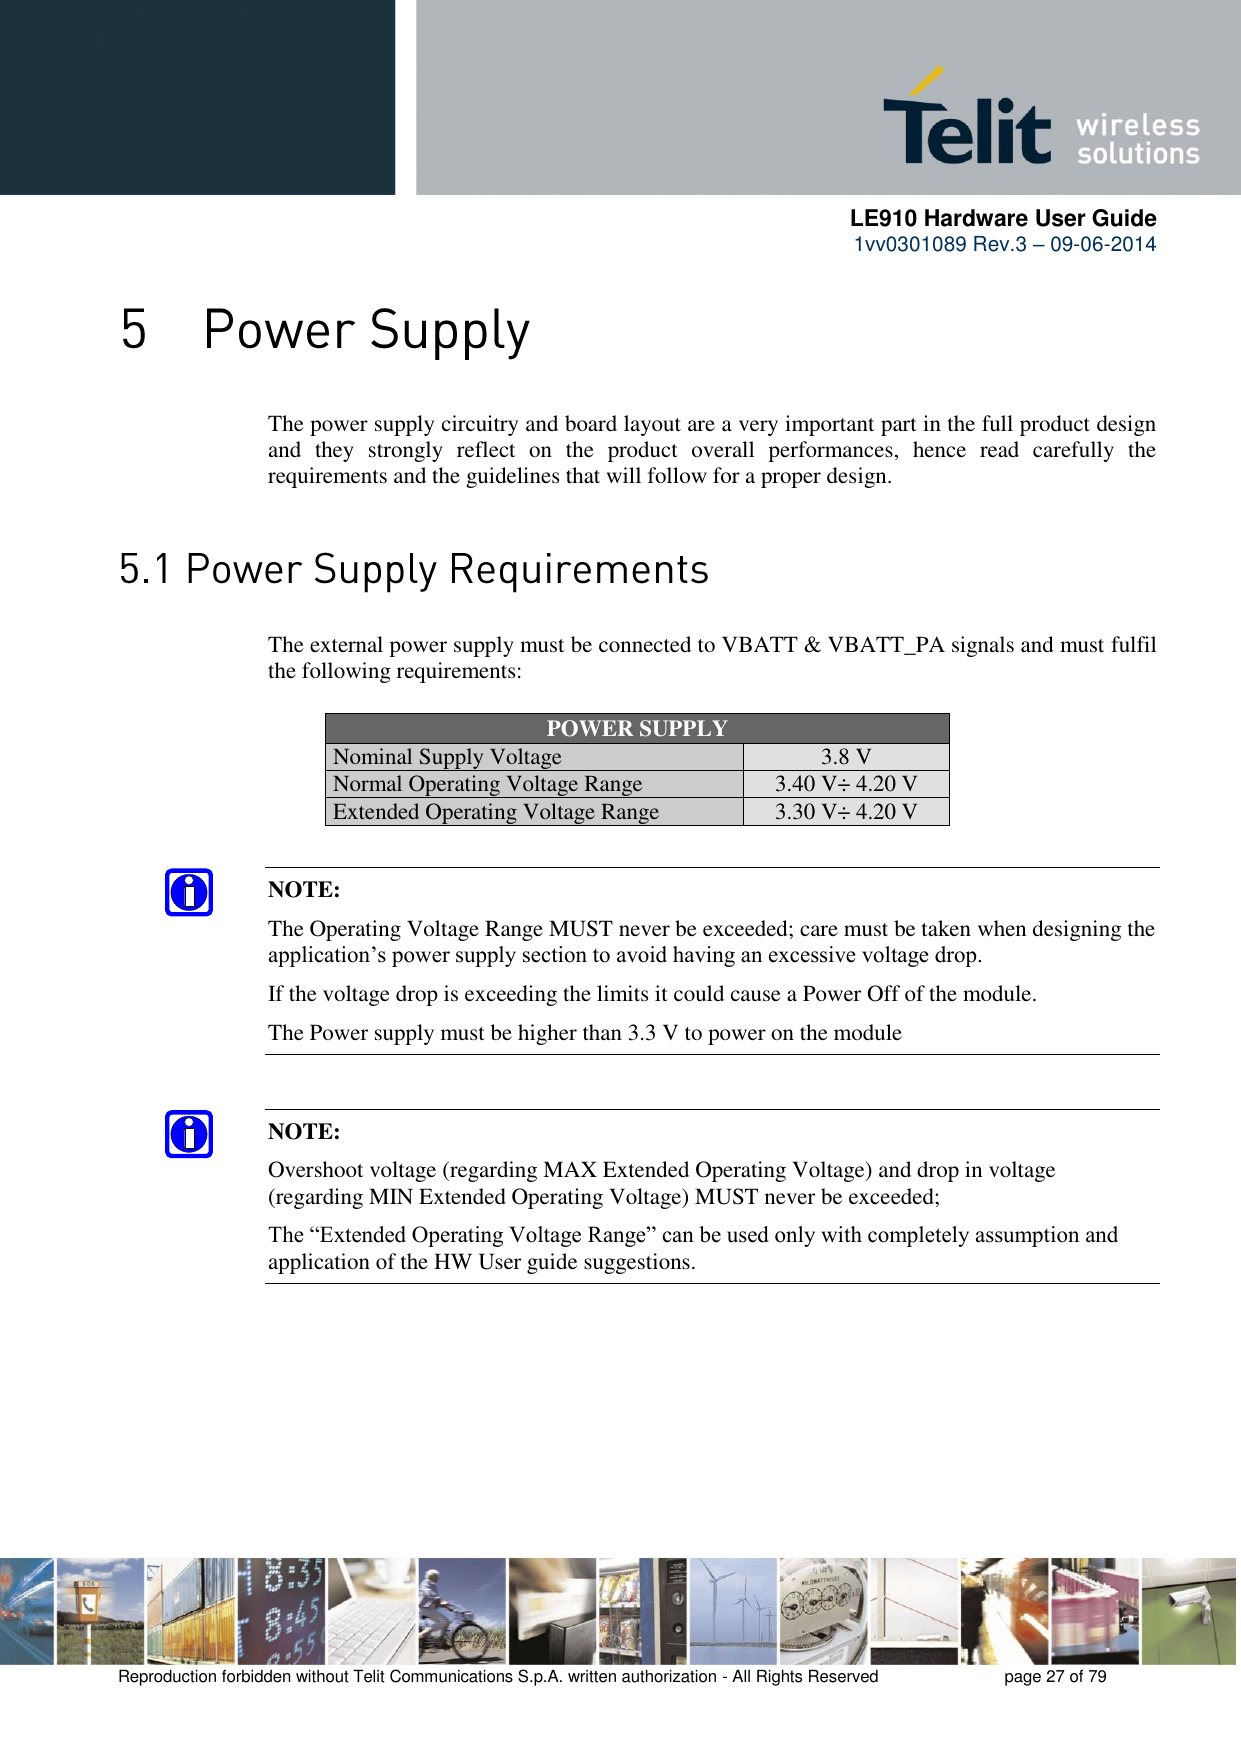      LE910 Hardware User Guide 1vv0301089 Rev.3 – 09-06-2014    Reproduction forbidden without Telit Communications S.p.A. written authorization - All Rights Reserved    page 27 of 79   The power supply circuitry and board layout are a very important part in the full product design and  they  strongly  reflect  on  the  product  overall  performances,  hence  read  carefully  the requirements and the guidelines that will follow for a proper design.   The external power supply must be connected to VBATT &amp; VBATT_PA signals and must fulfil the following requirements: POWER SUPPLY Nominal Supply Voltage 3.8 V Normal Operating Voltage Range 3.40 V÷ 4.20 V Extended Operating Voltage Range 3.30 V÷ 4.20 V NOTE: The Operating Voltage Range MUST never be exceeded; care must be taken when designing the application’s power supply section to avoid having an excessive voltage drop.  If the voltage drop is exceeding the limits it could cause a Power Off of the module. The Power supply must be higher than 3.3 V to power on the module NOTE: Overshoot voltage (regarding MAX Extended Operating Voltage) and drop in voltage (regarding MIN Extended Operating Voltage) MUST never be exceeded;  The “Extended Operating Voltage Range” can be used only with completely assumption and application of the HW User guide suggestions.   